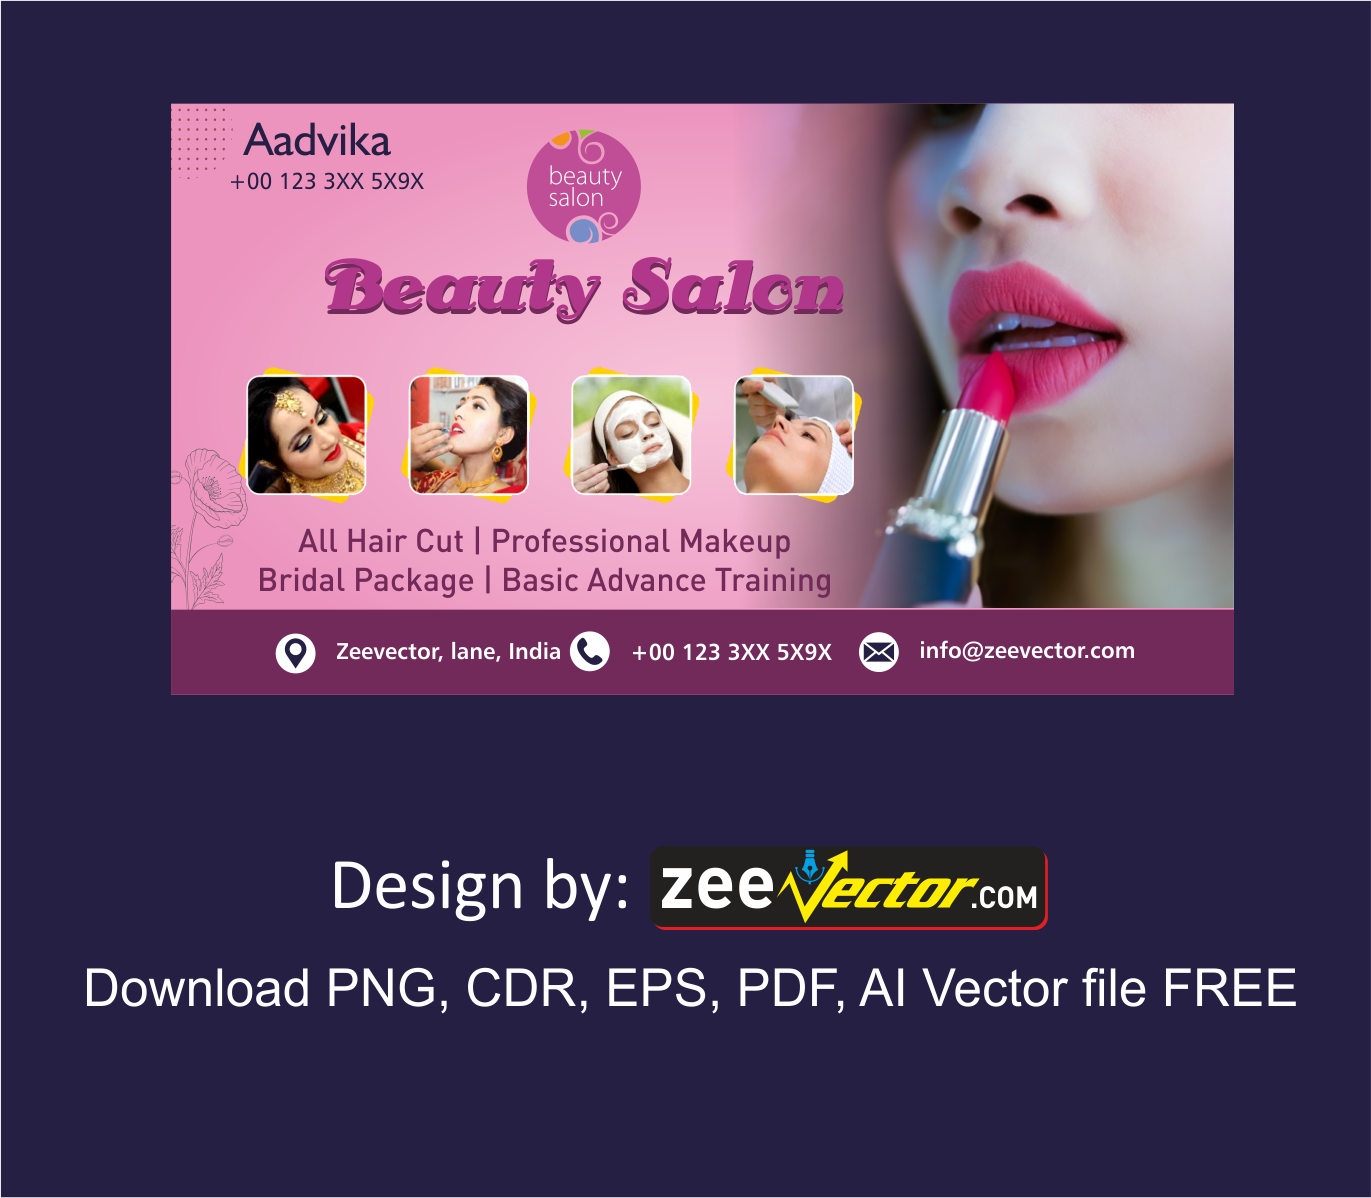 Beauty-Parlor-Visiting-Card-Design-CDR-free